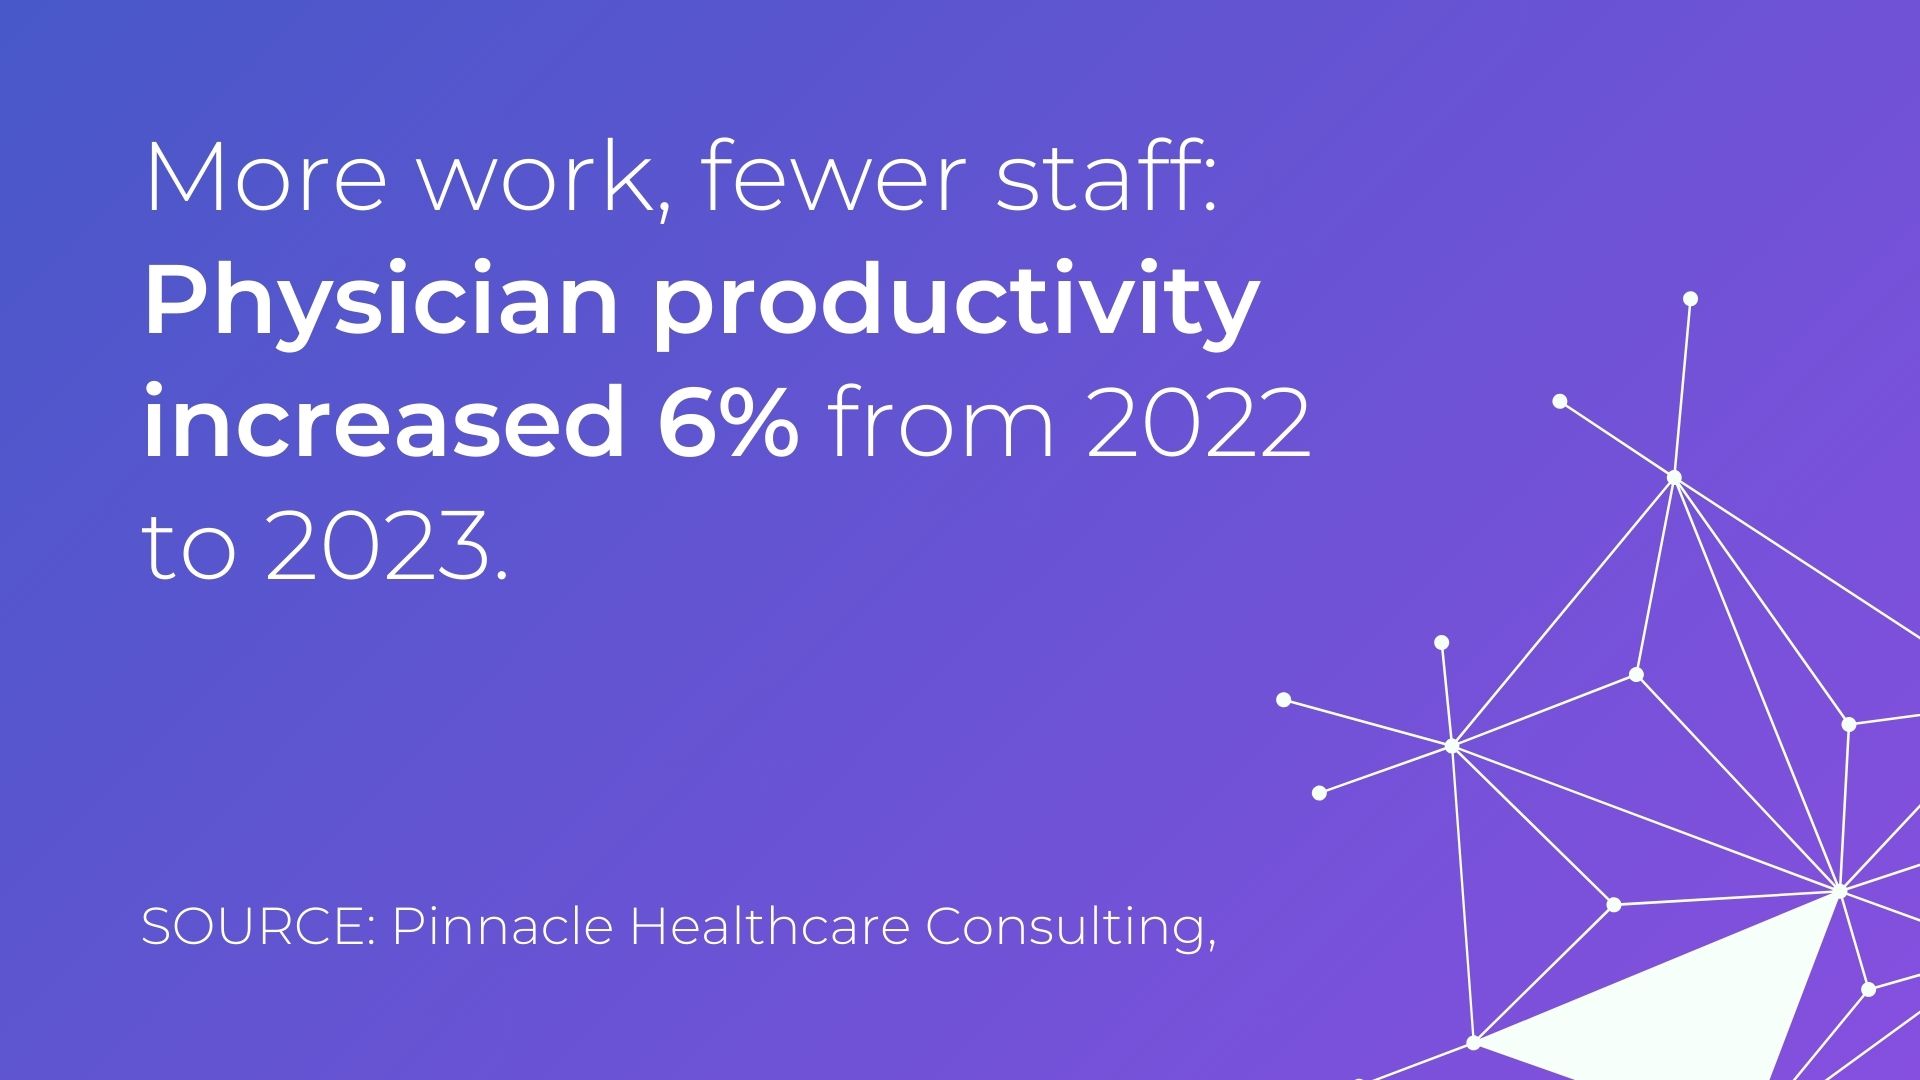 More work, fewer staff - according to Pinnacle Healthcare Consulting, physician productivity increased 6% from 2022 to 2023